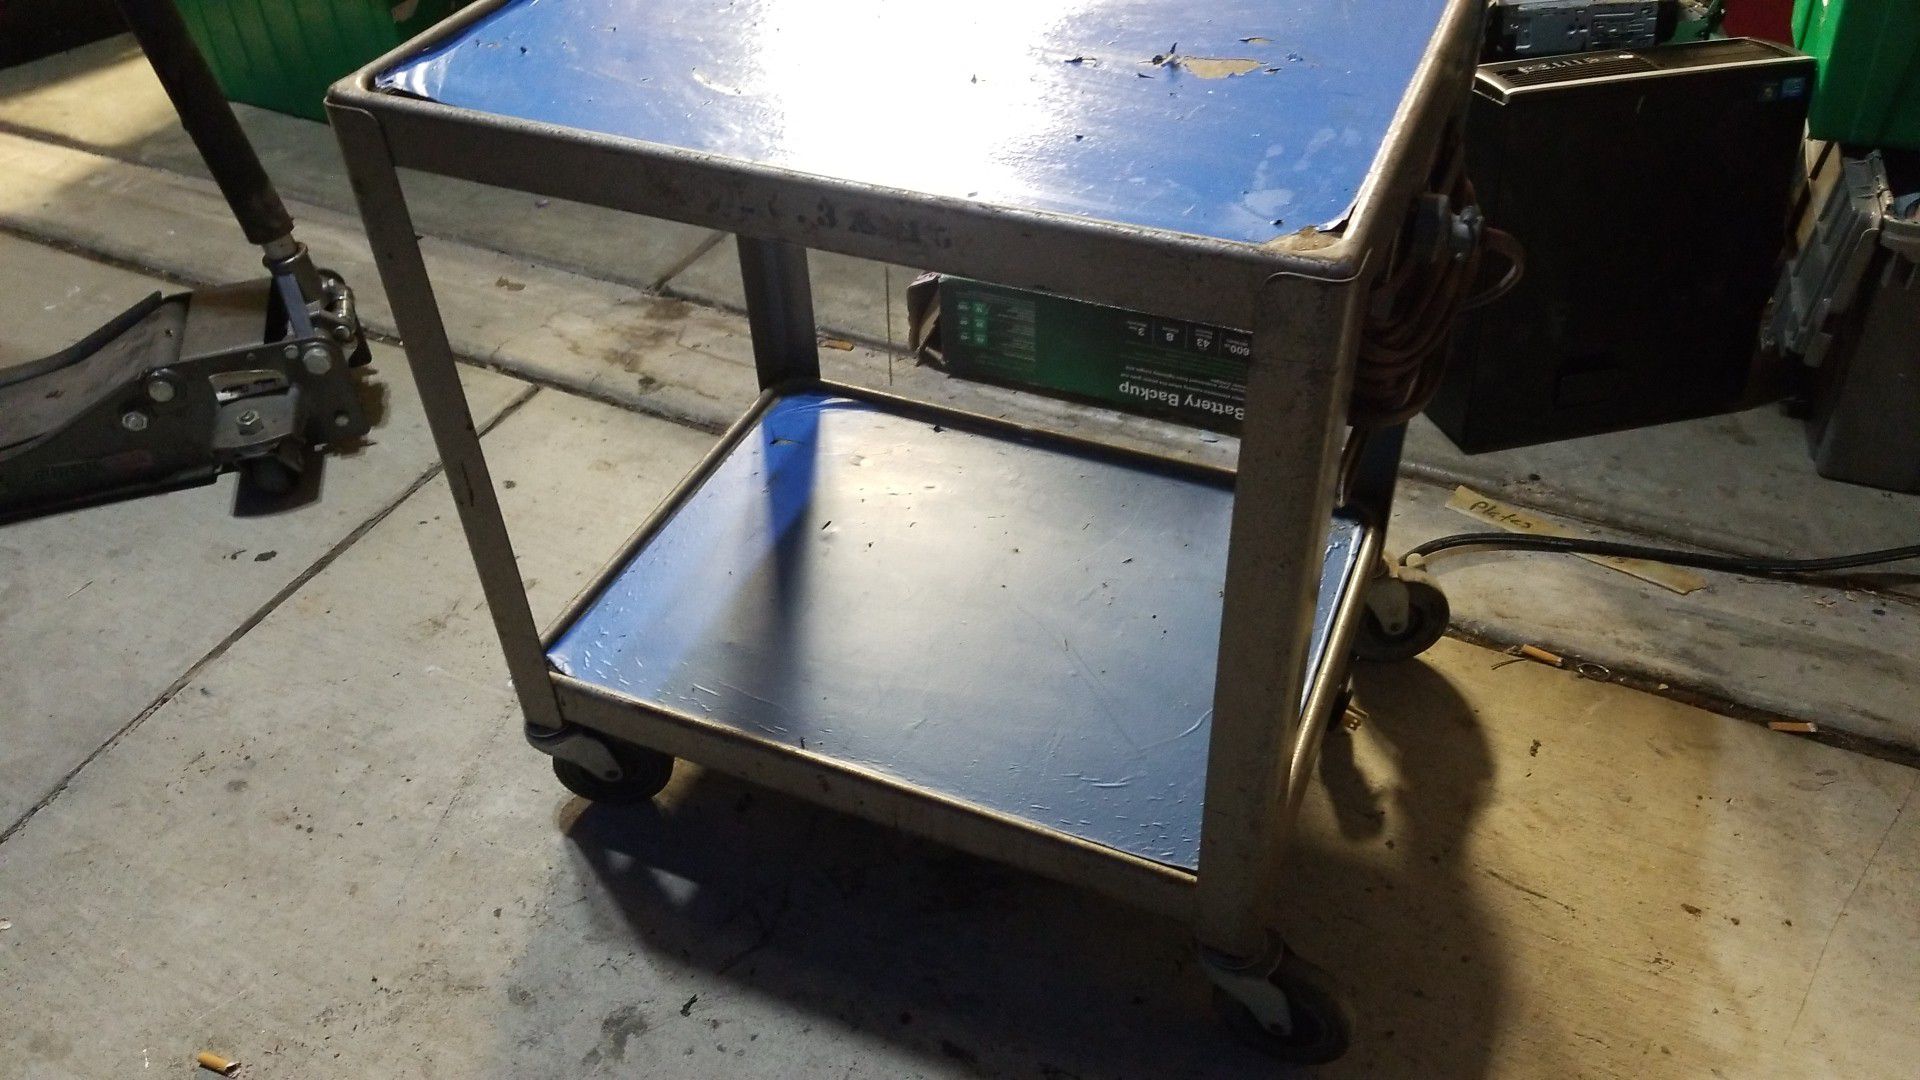 Rolling work cart with electrical outlets & locking wheels